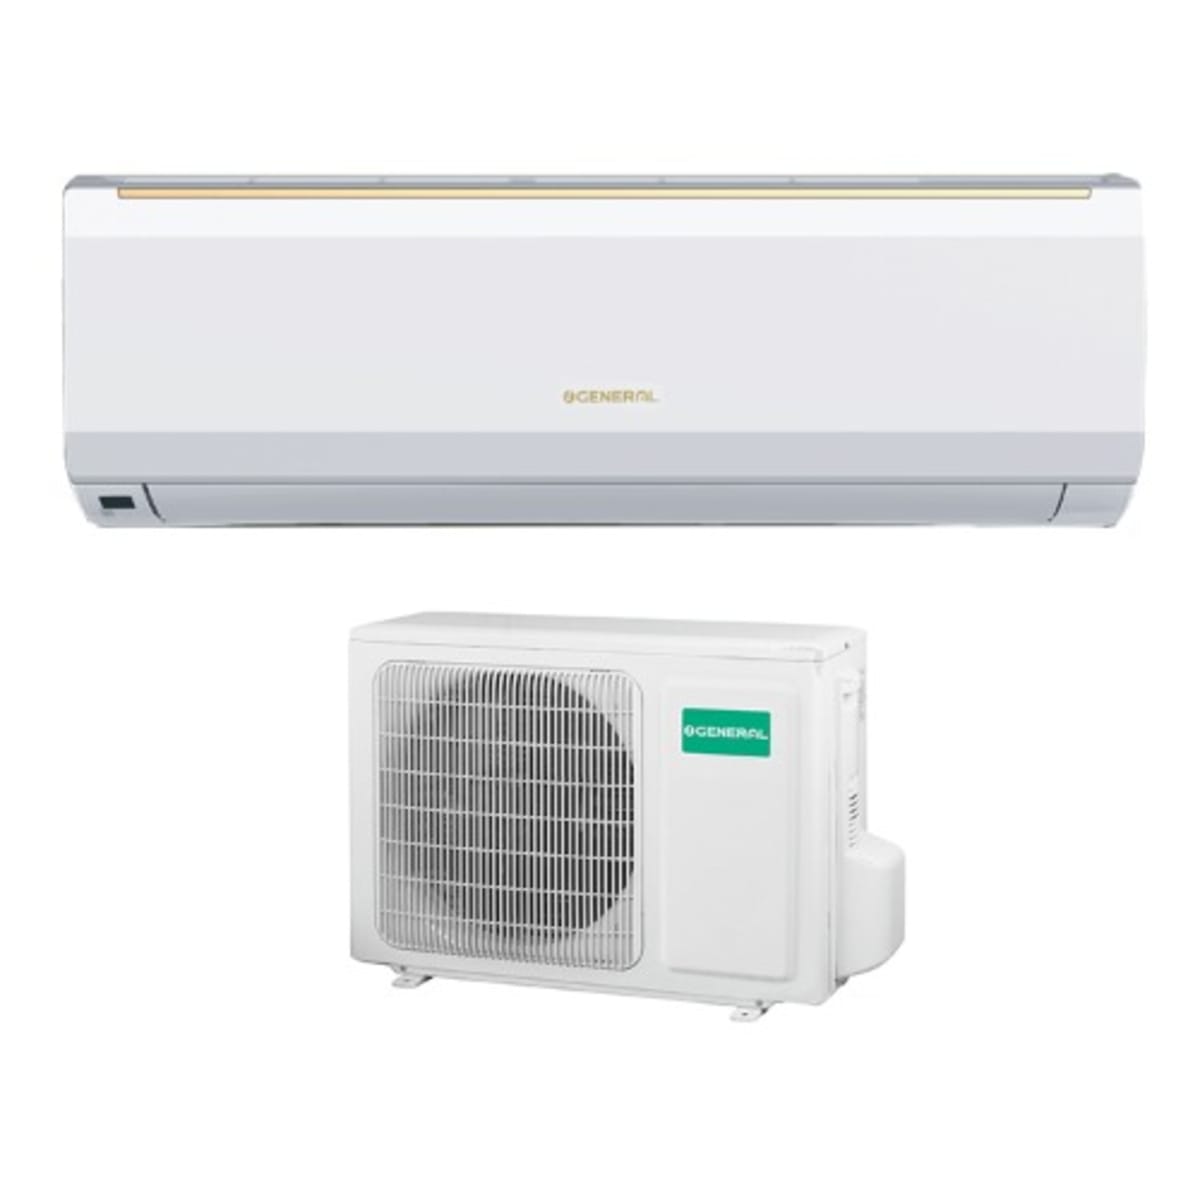 O General Inverter Split Copper Air Conditioner – R410a | Konga Shopping